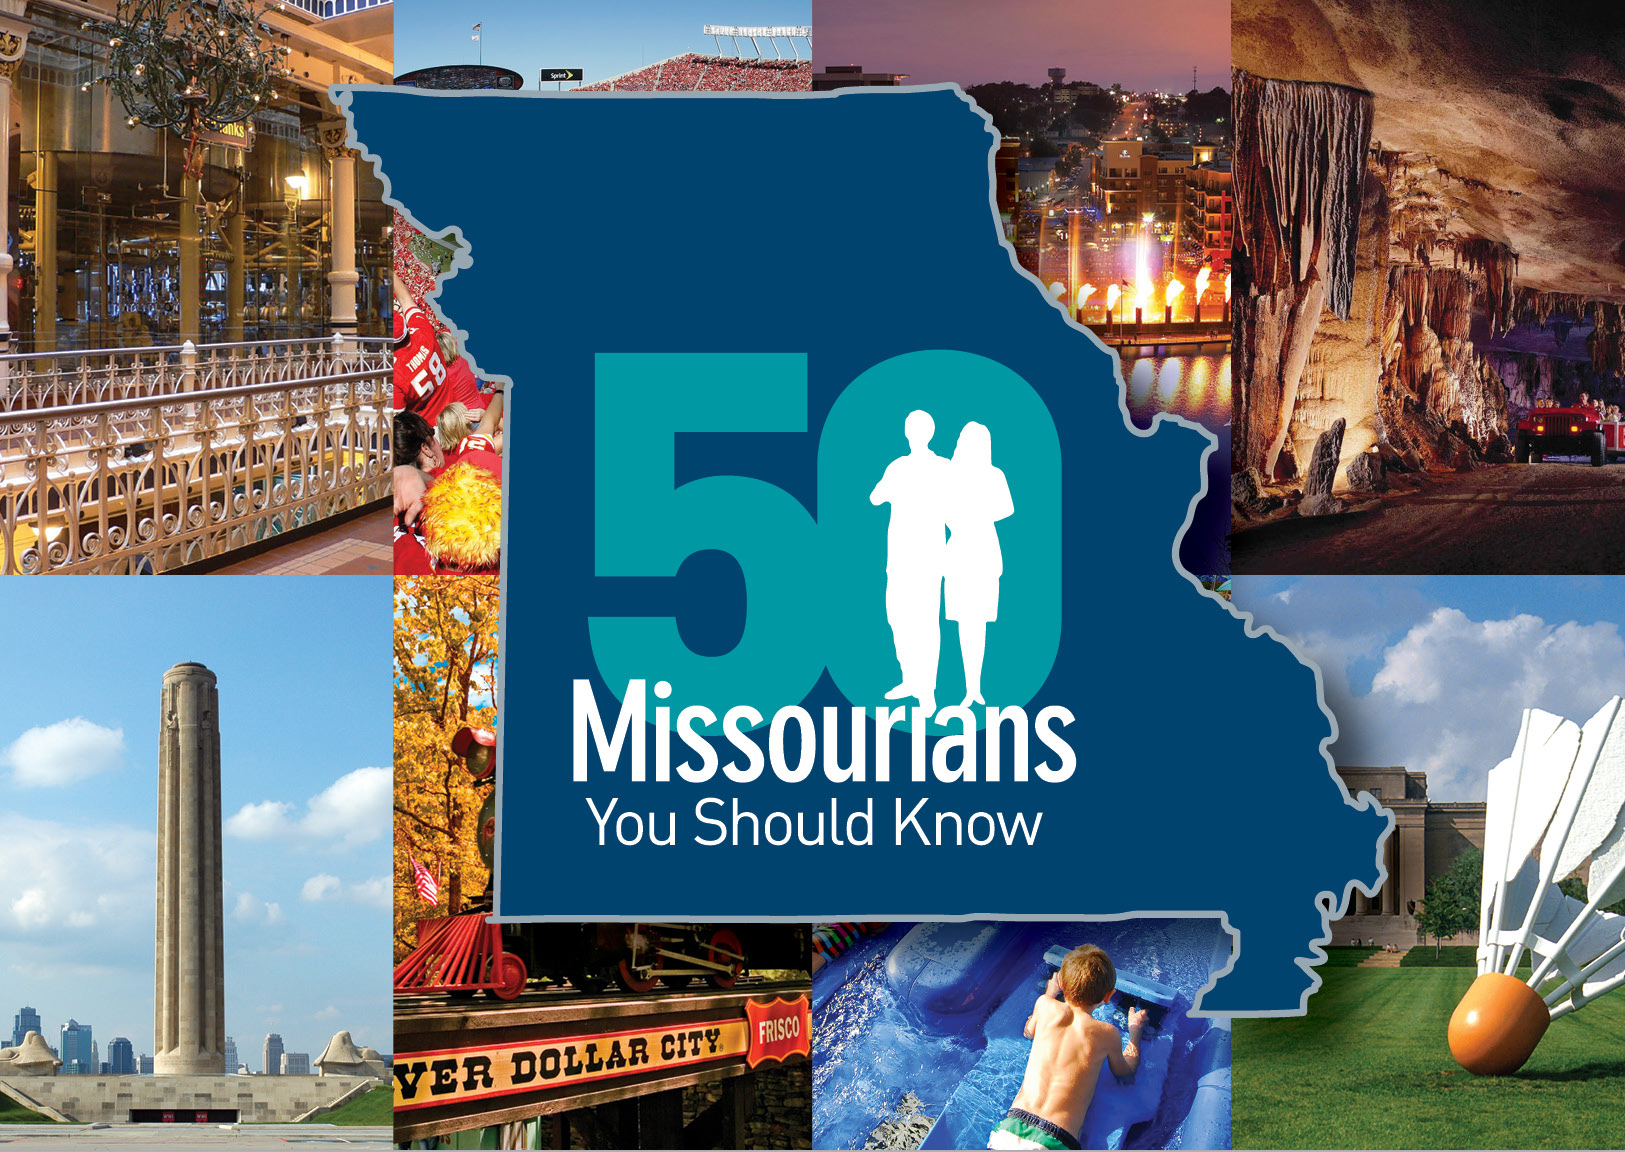 50 Missourians You Should Know pic